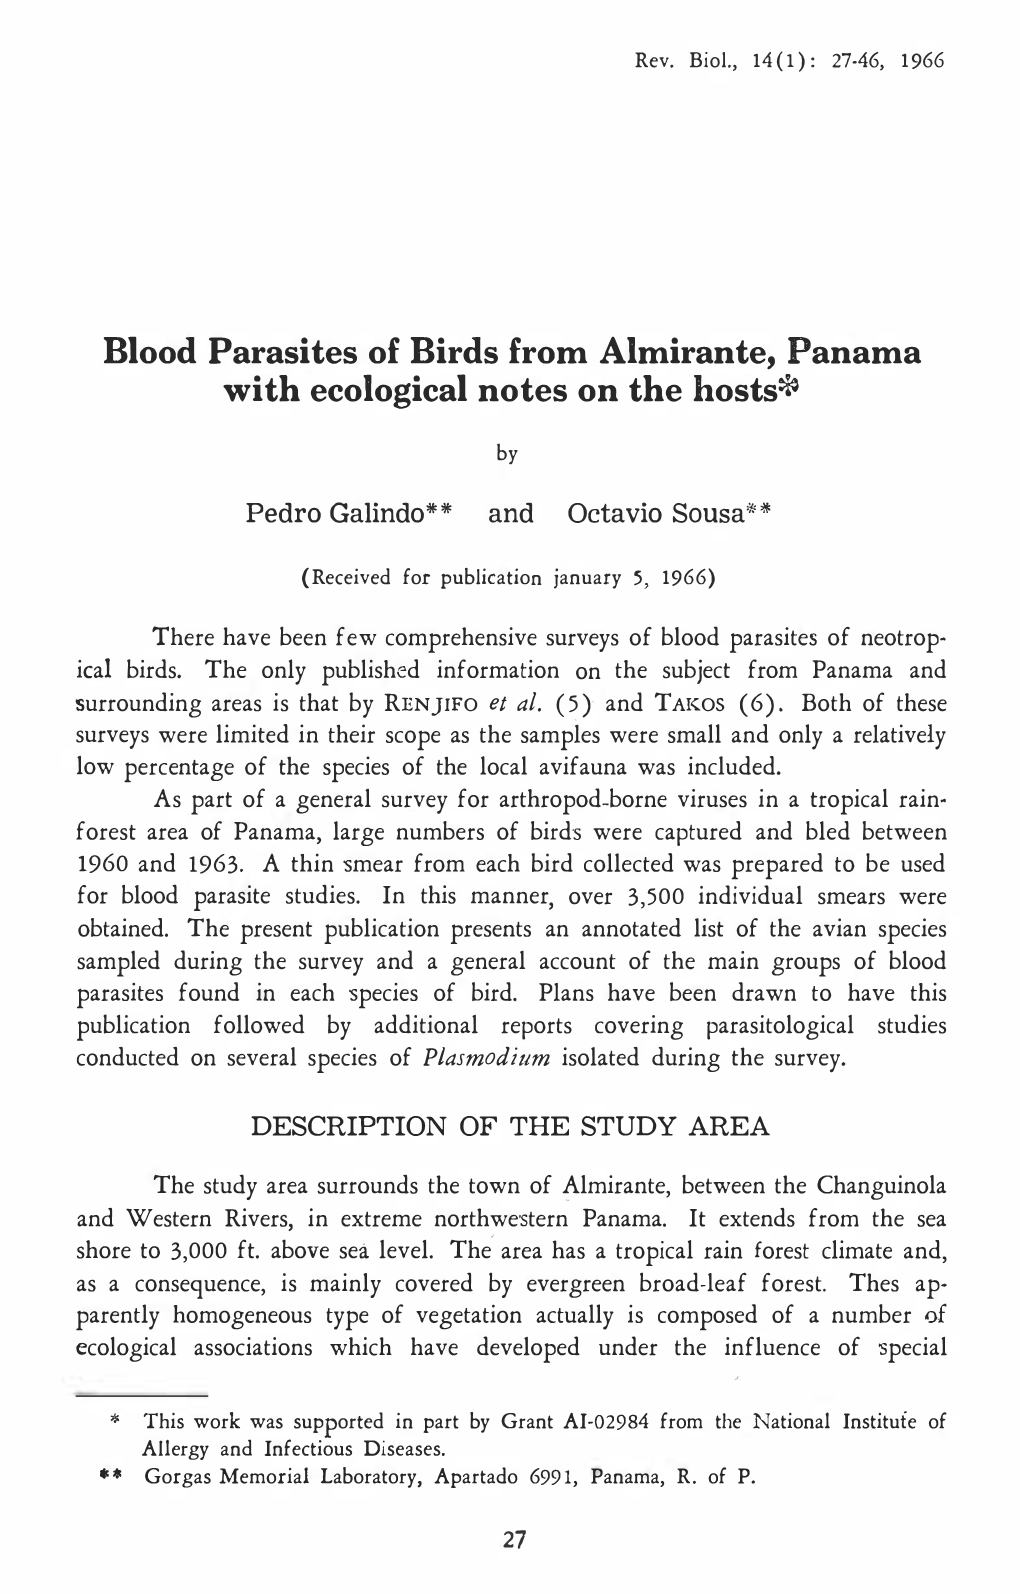 Blood Parasites of Birds from Almirante, Panama with Ecological Notes on the Hosts*